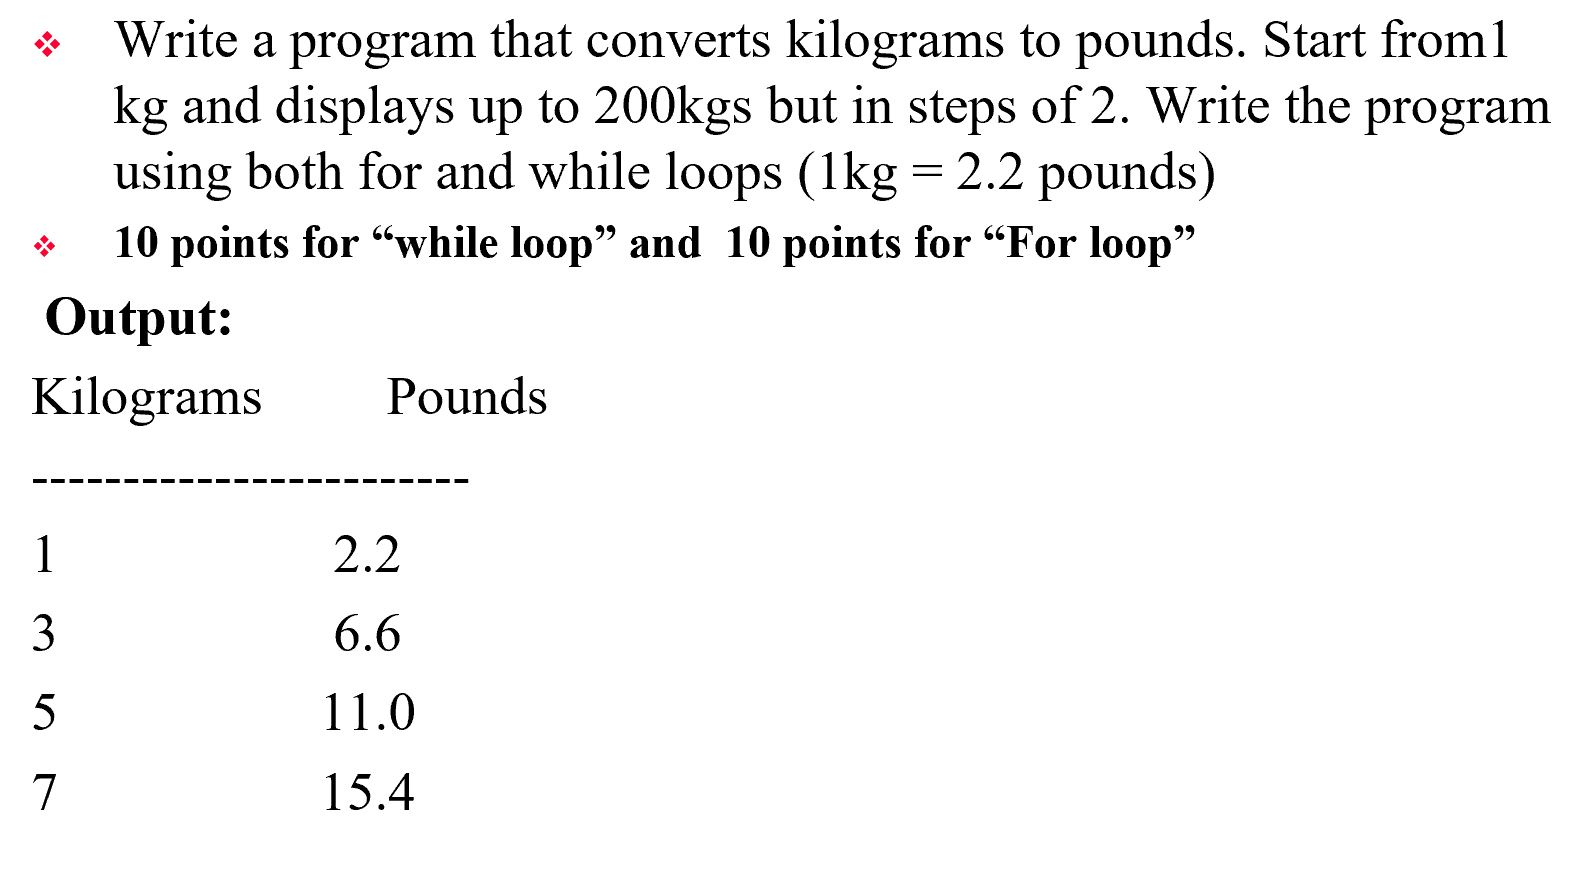 Kilograms to 200 Pounds in Kg converter - How much Convert 200 Kilograms .....